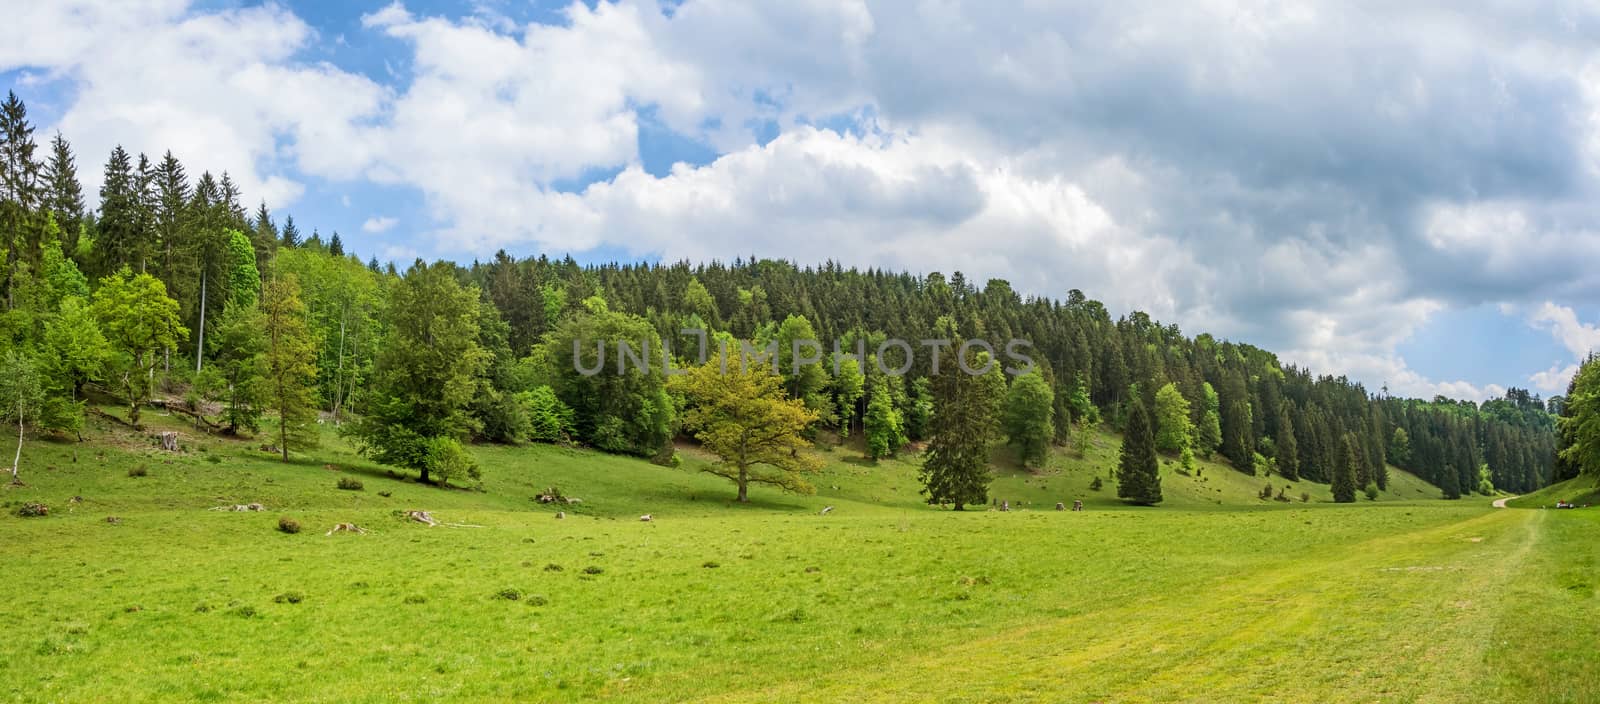 Forest panorama with meadow in the foreground - Wental valley at Swabian Alps